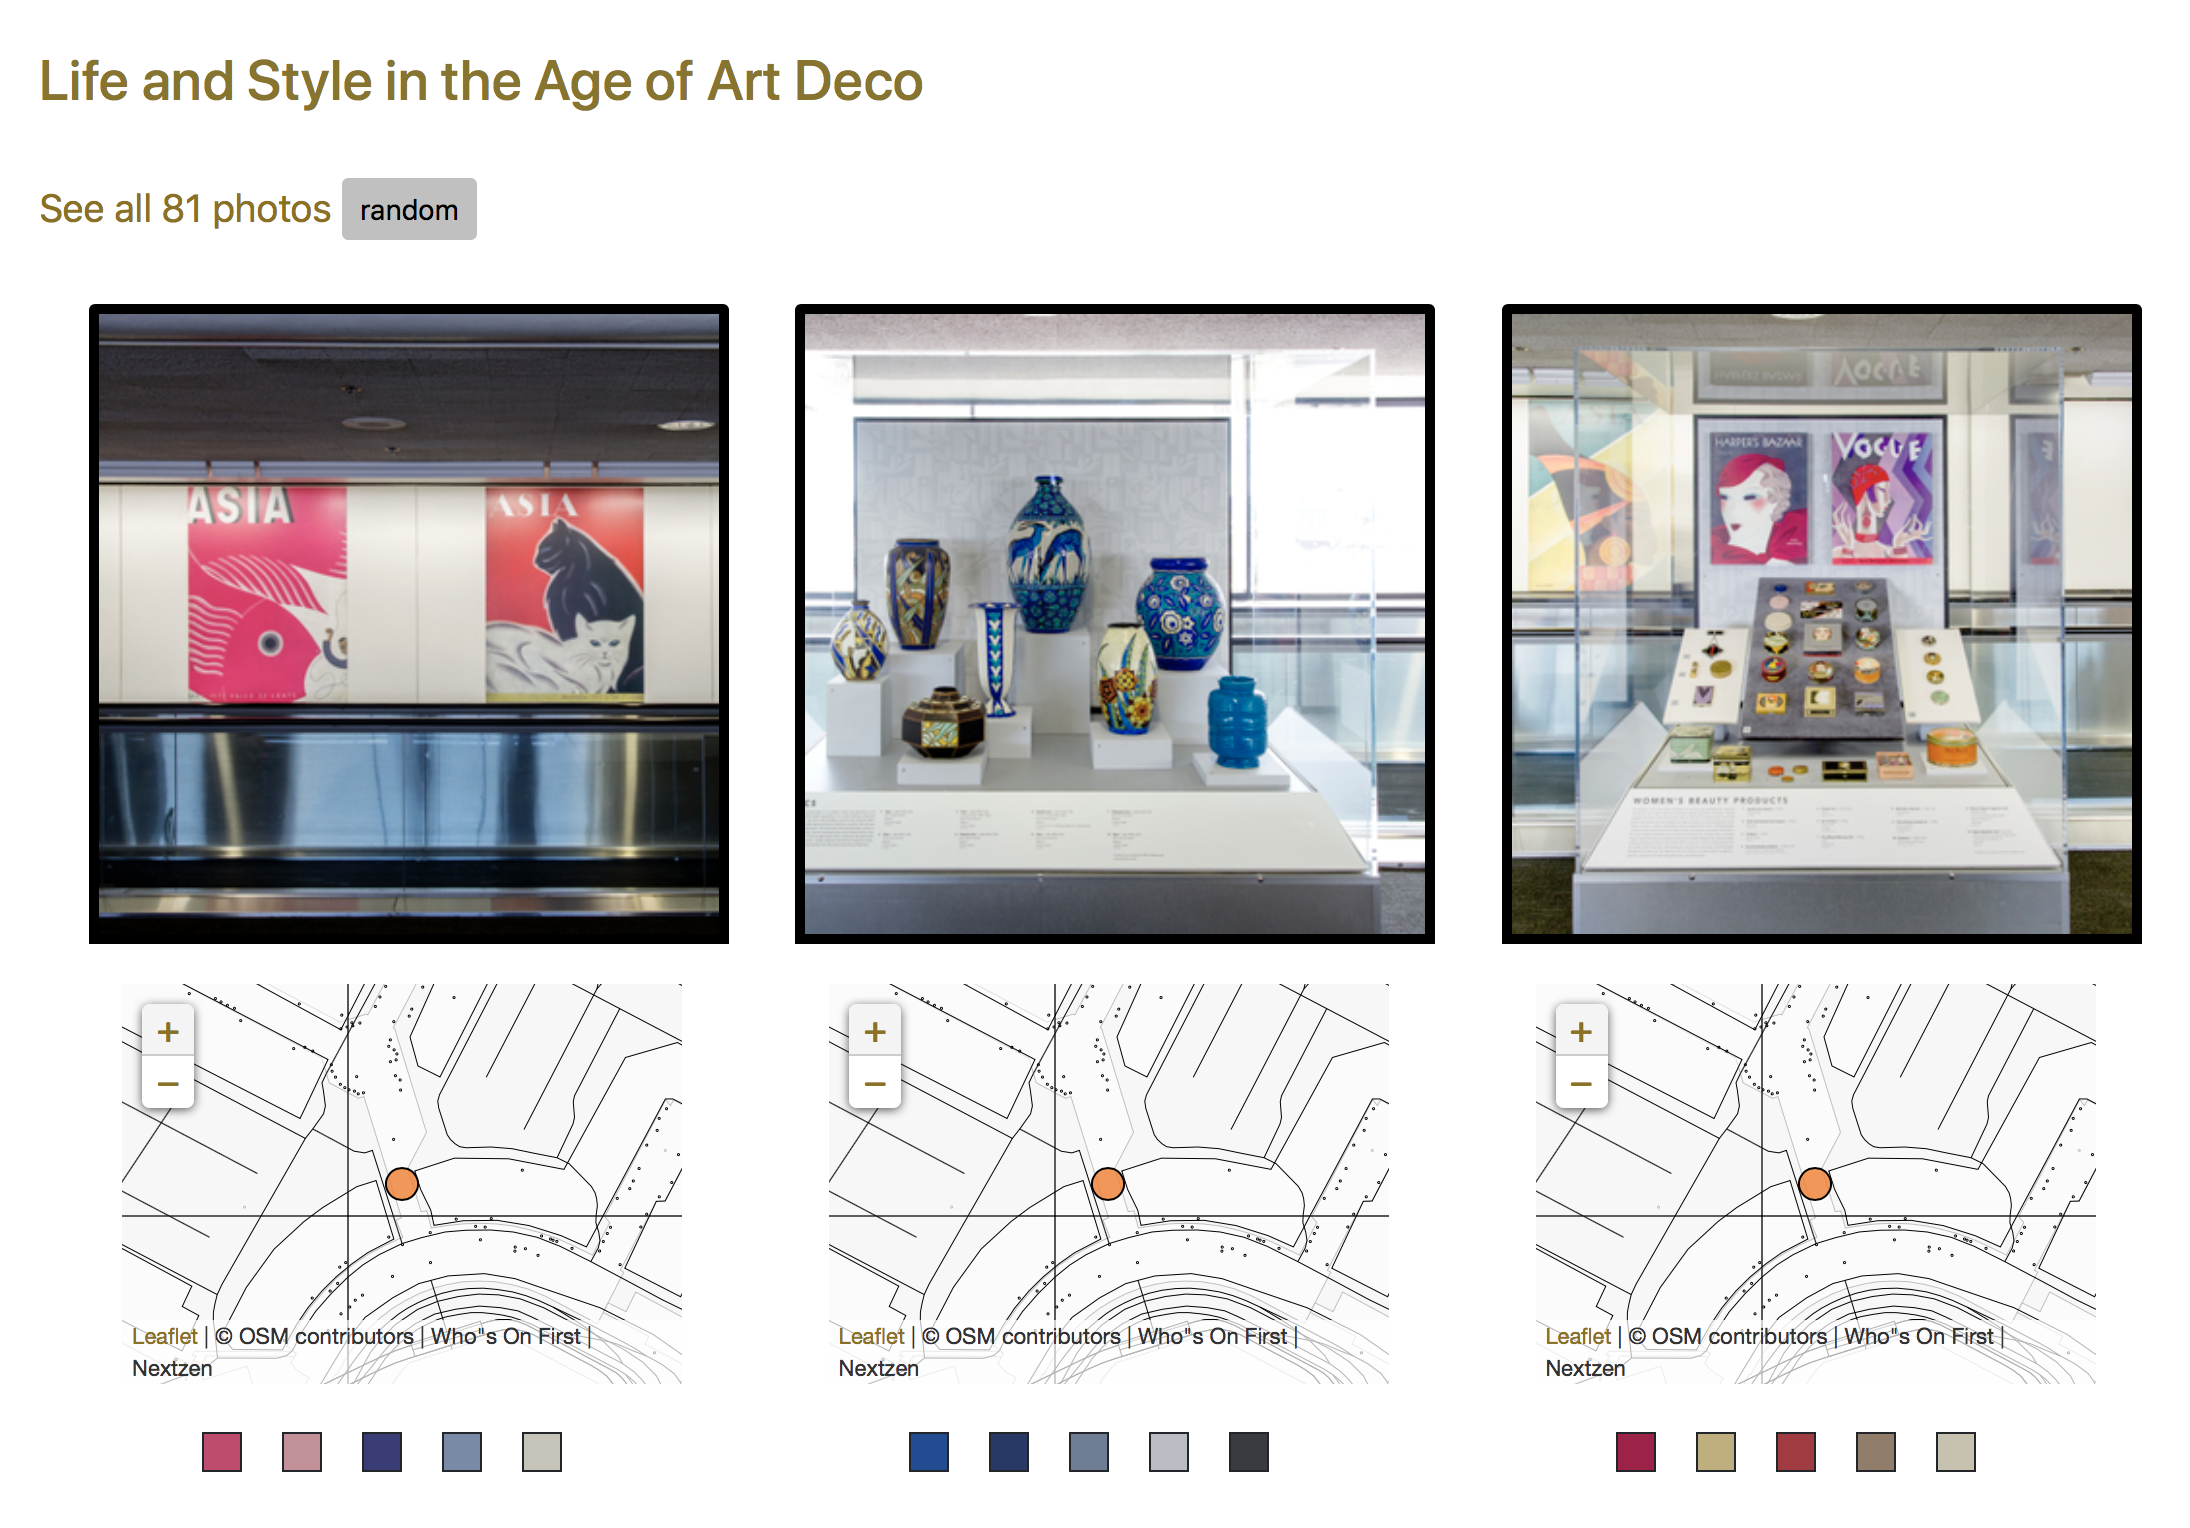 Smart cropped thumbnails and color palettes of installation photos from the Life and Style in the Age of Art Deco exhibition